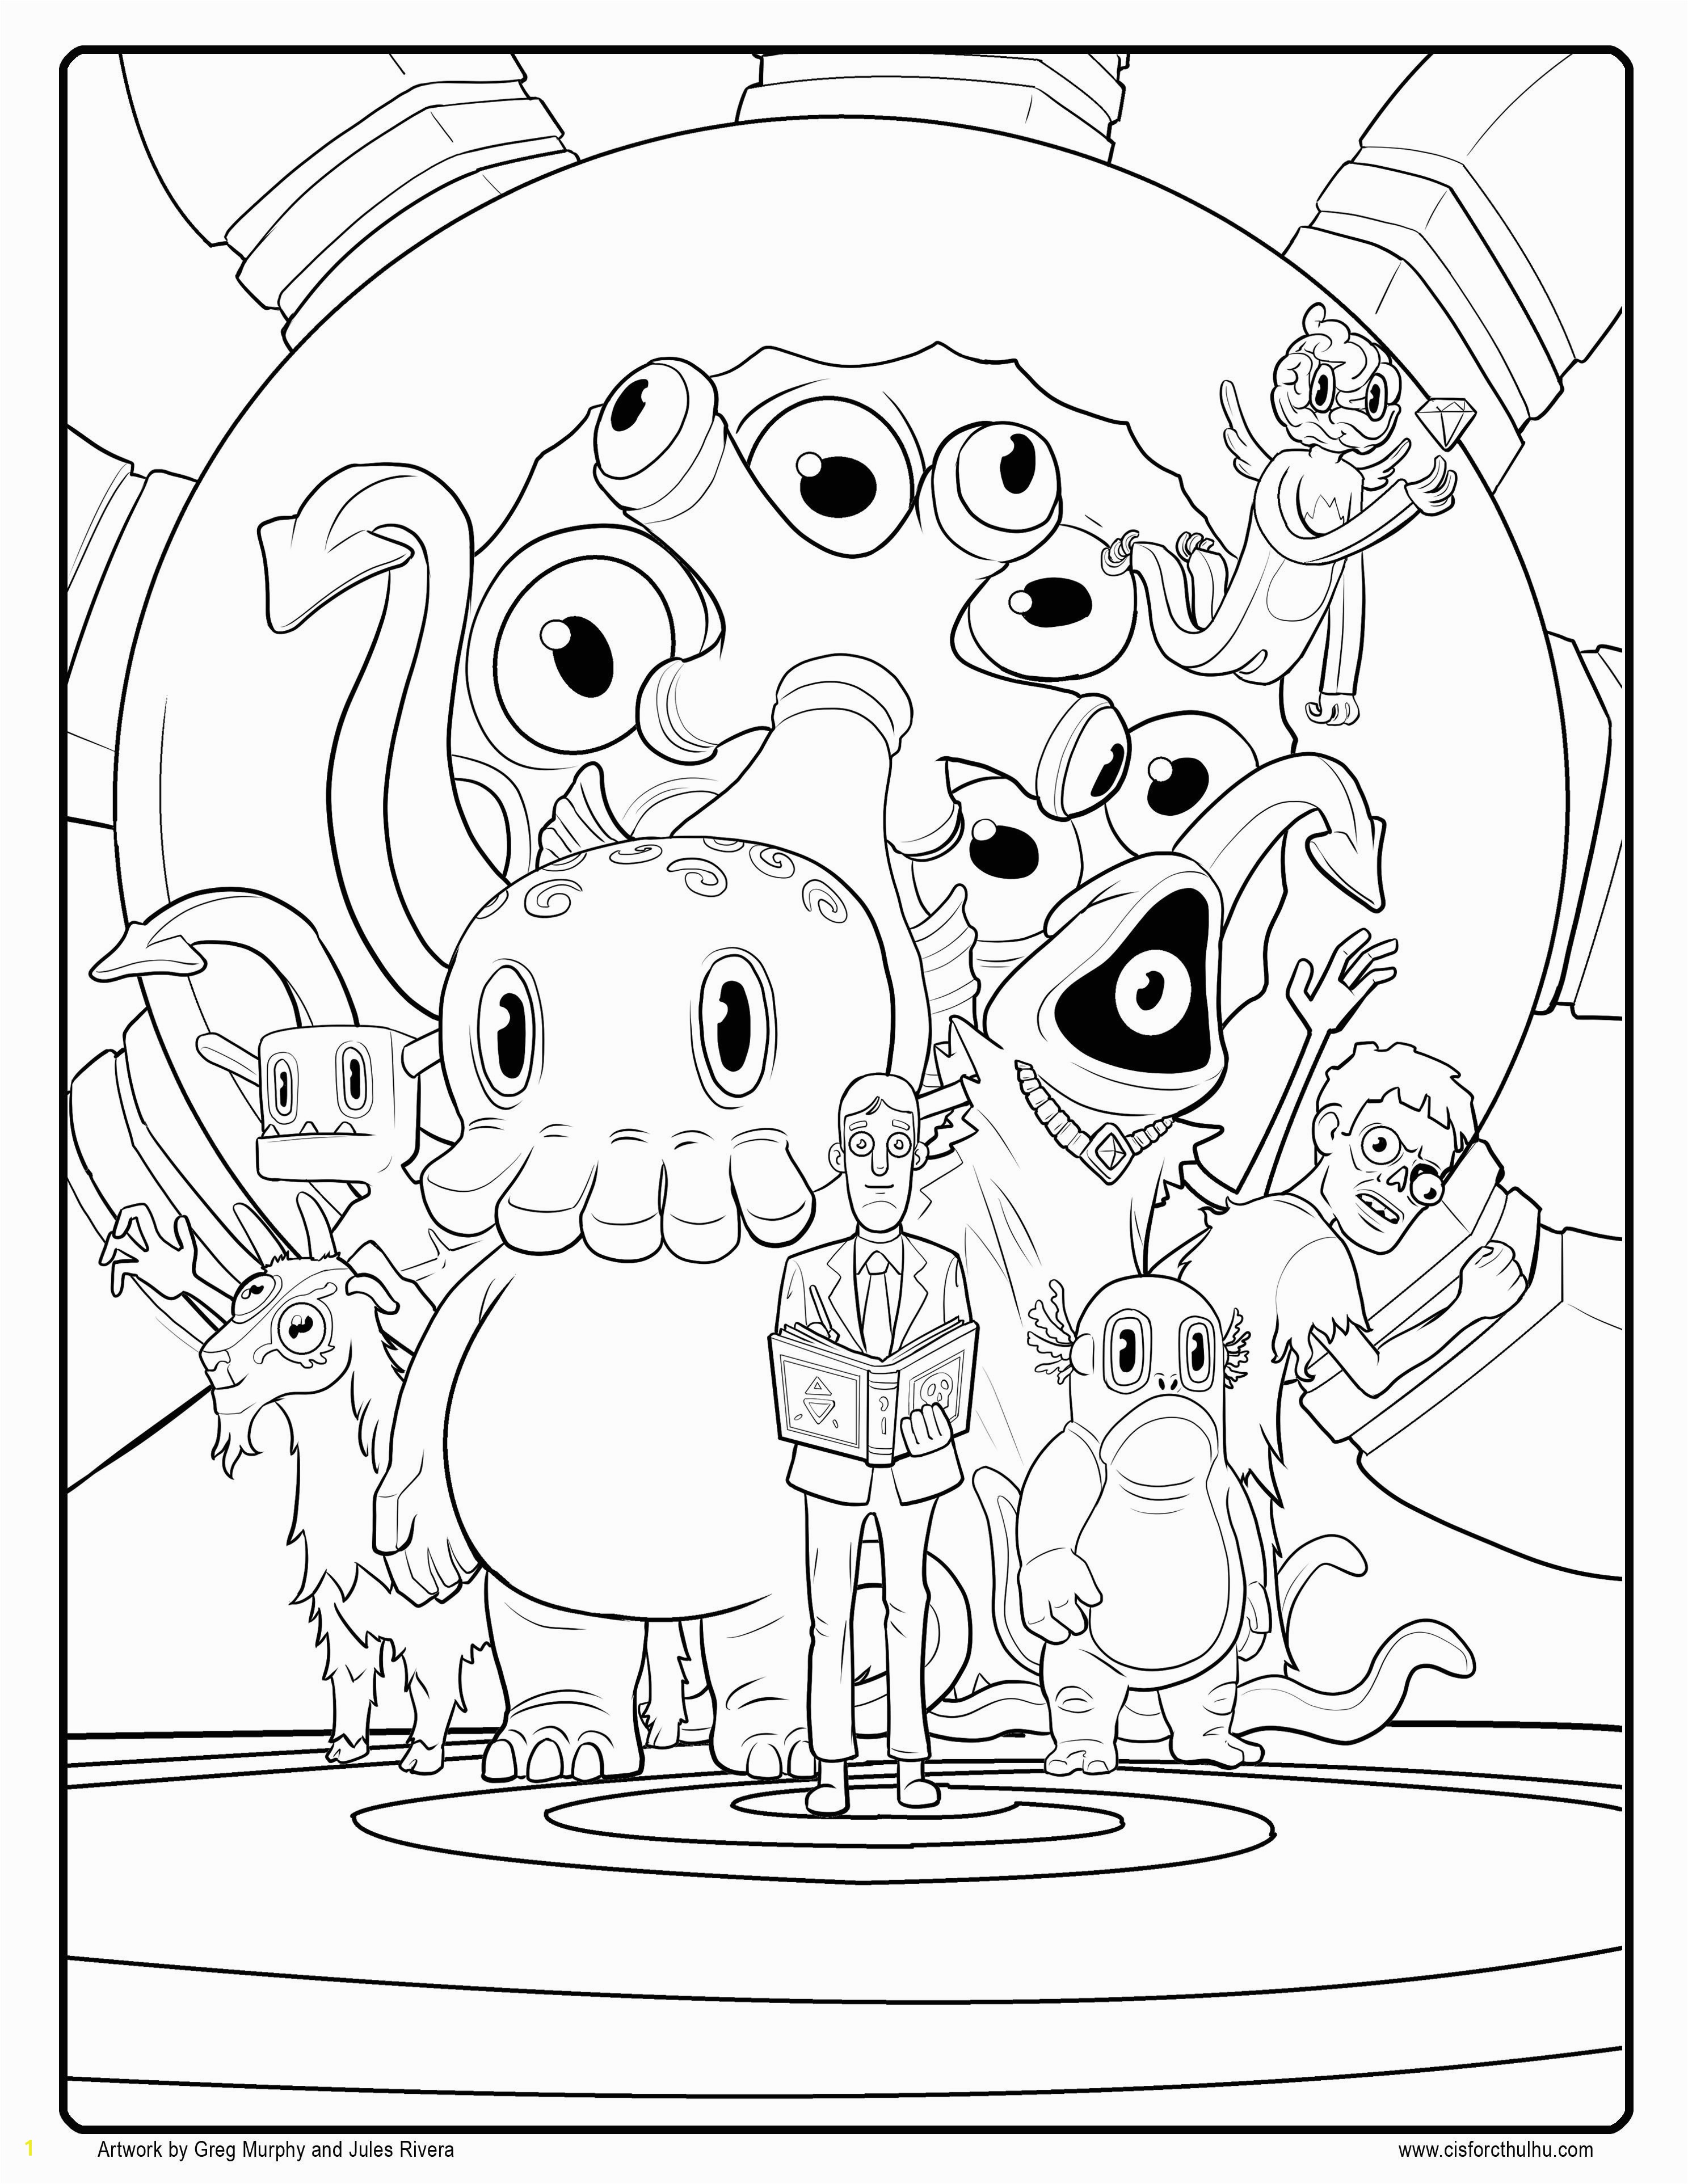 Awesome Coloring Pages New Marvel Coloring Pages Awesome I Pinimg originals 0d 61 31 0d Df1b08